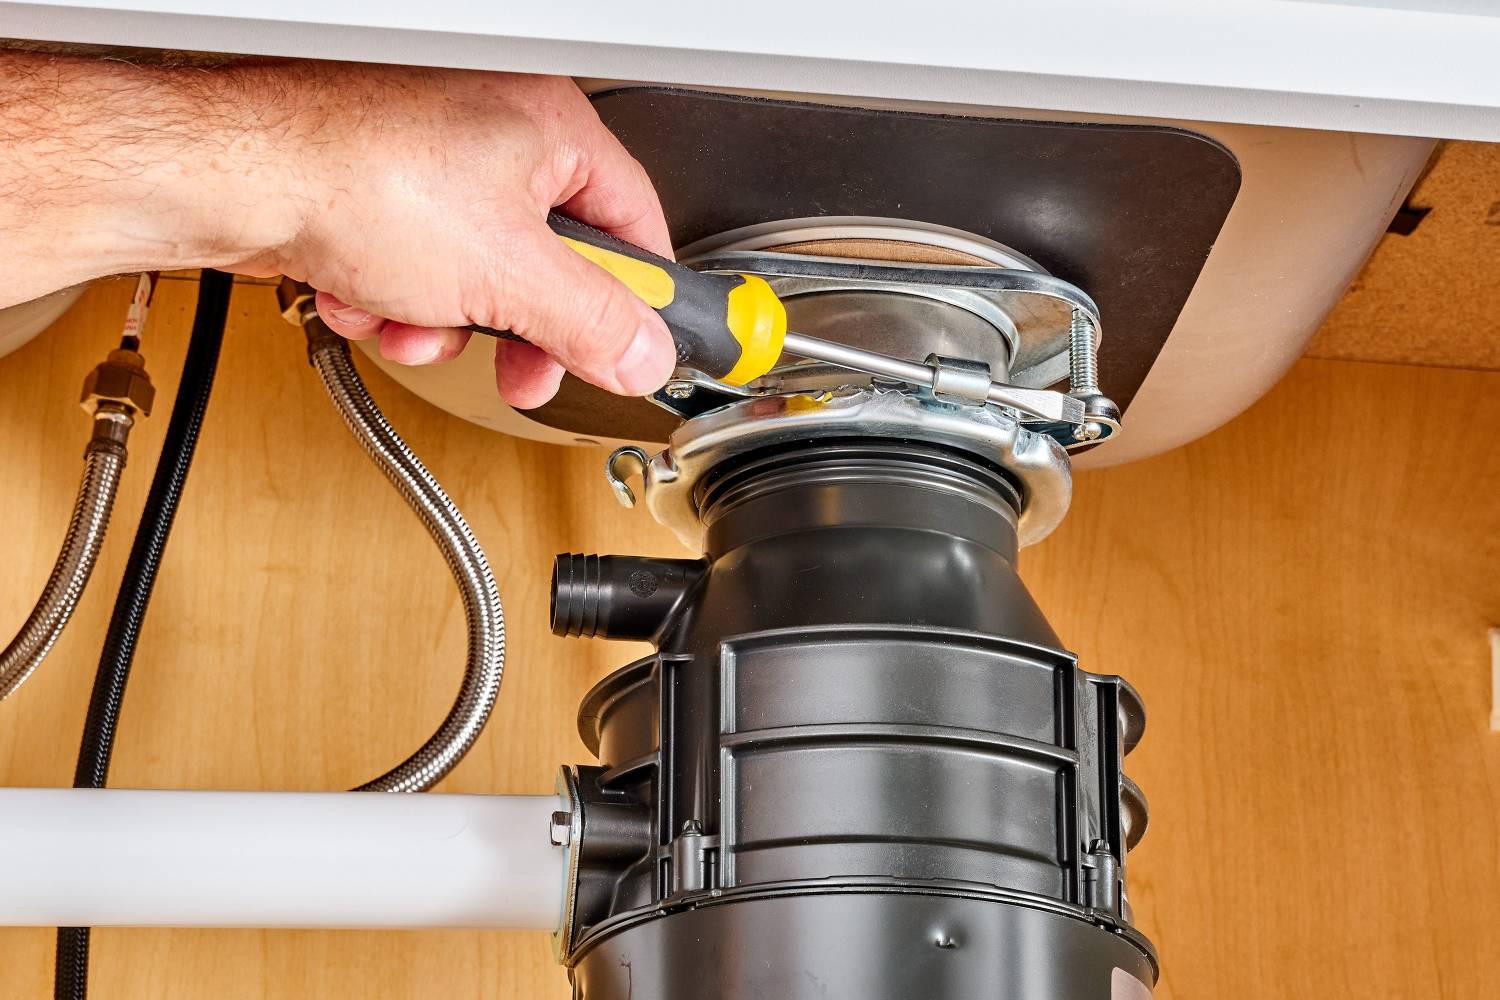 Easy Steps to Install a Garbage Disposal